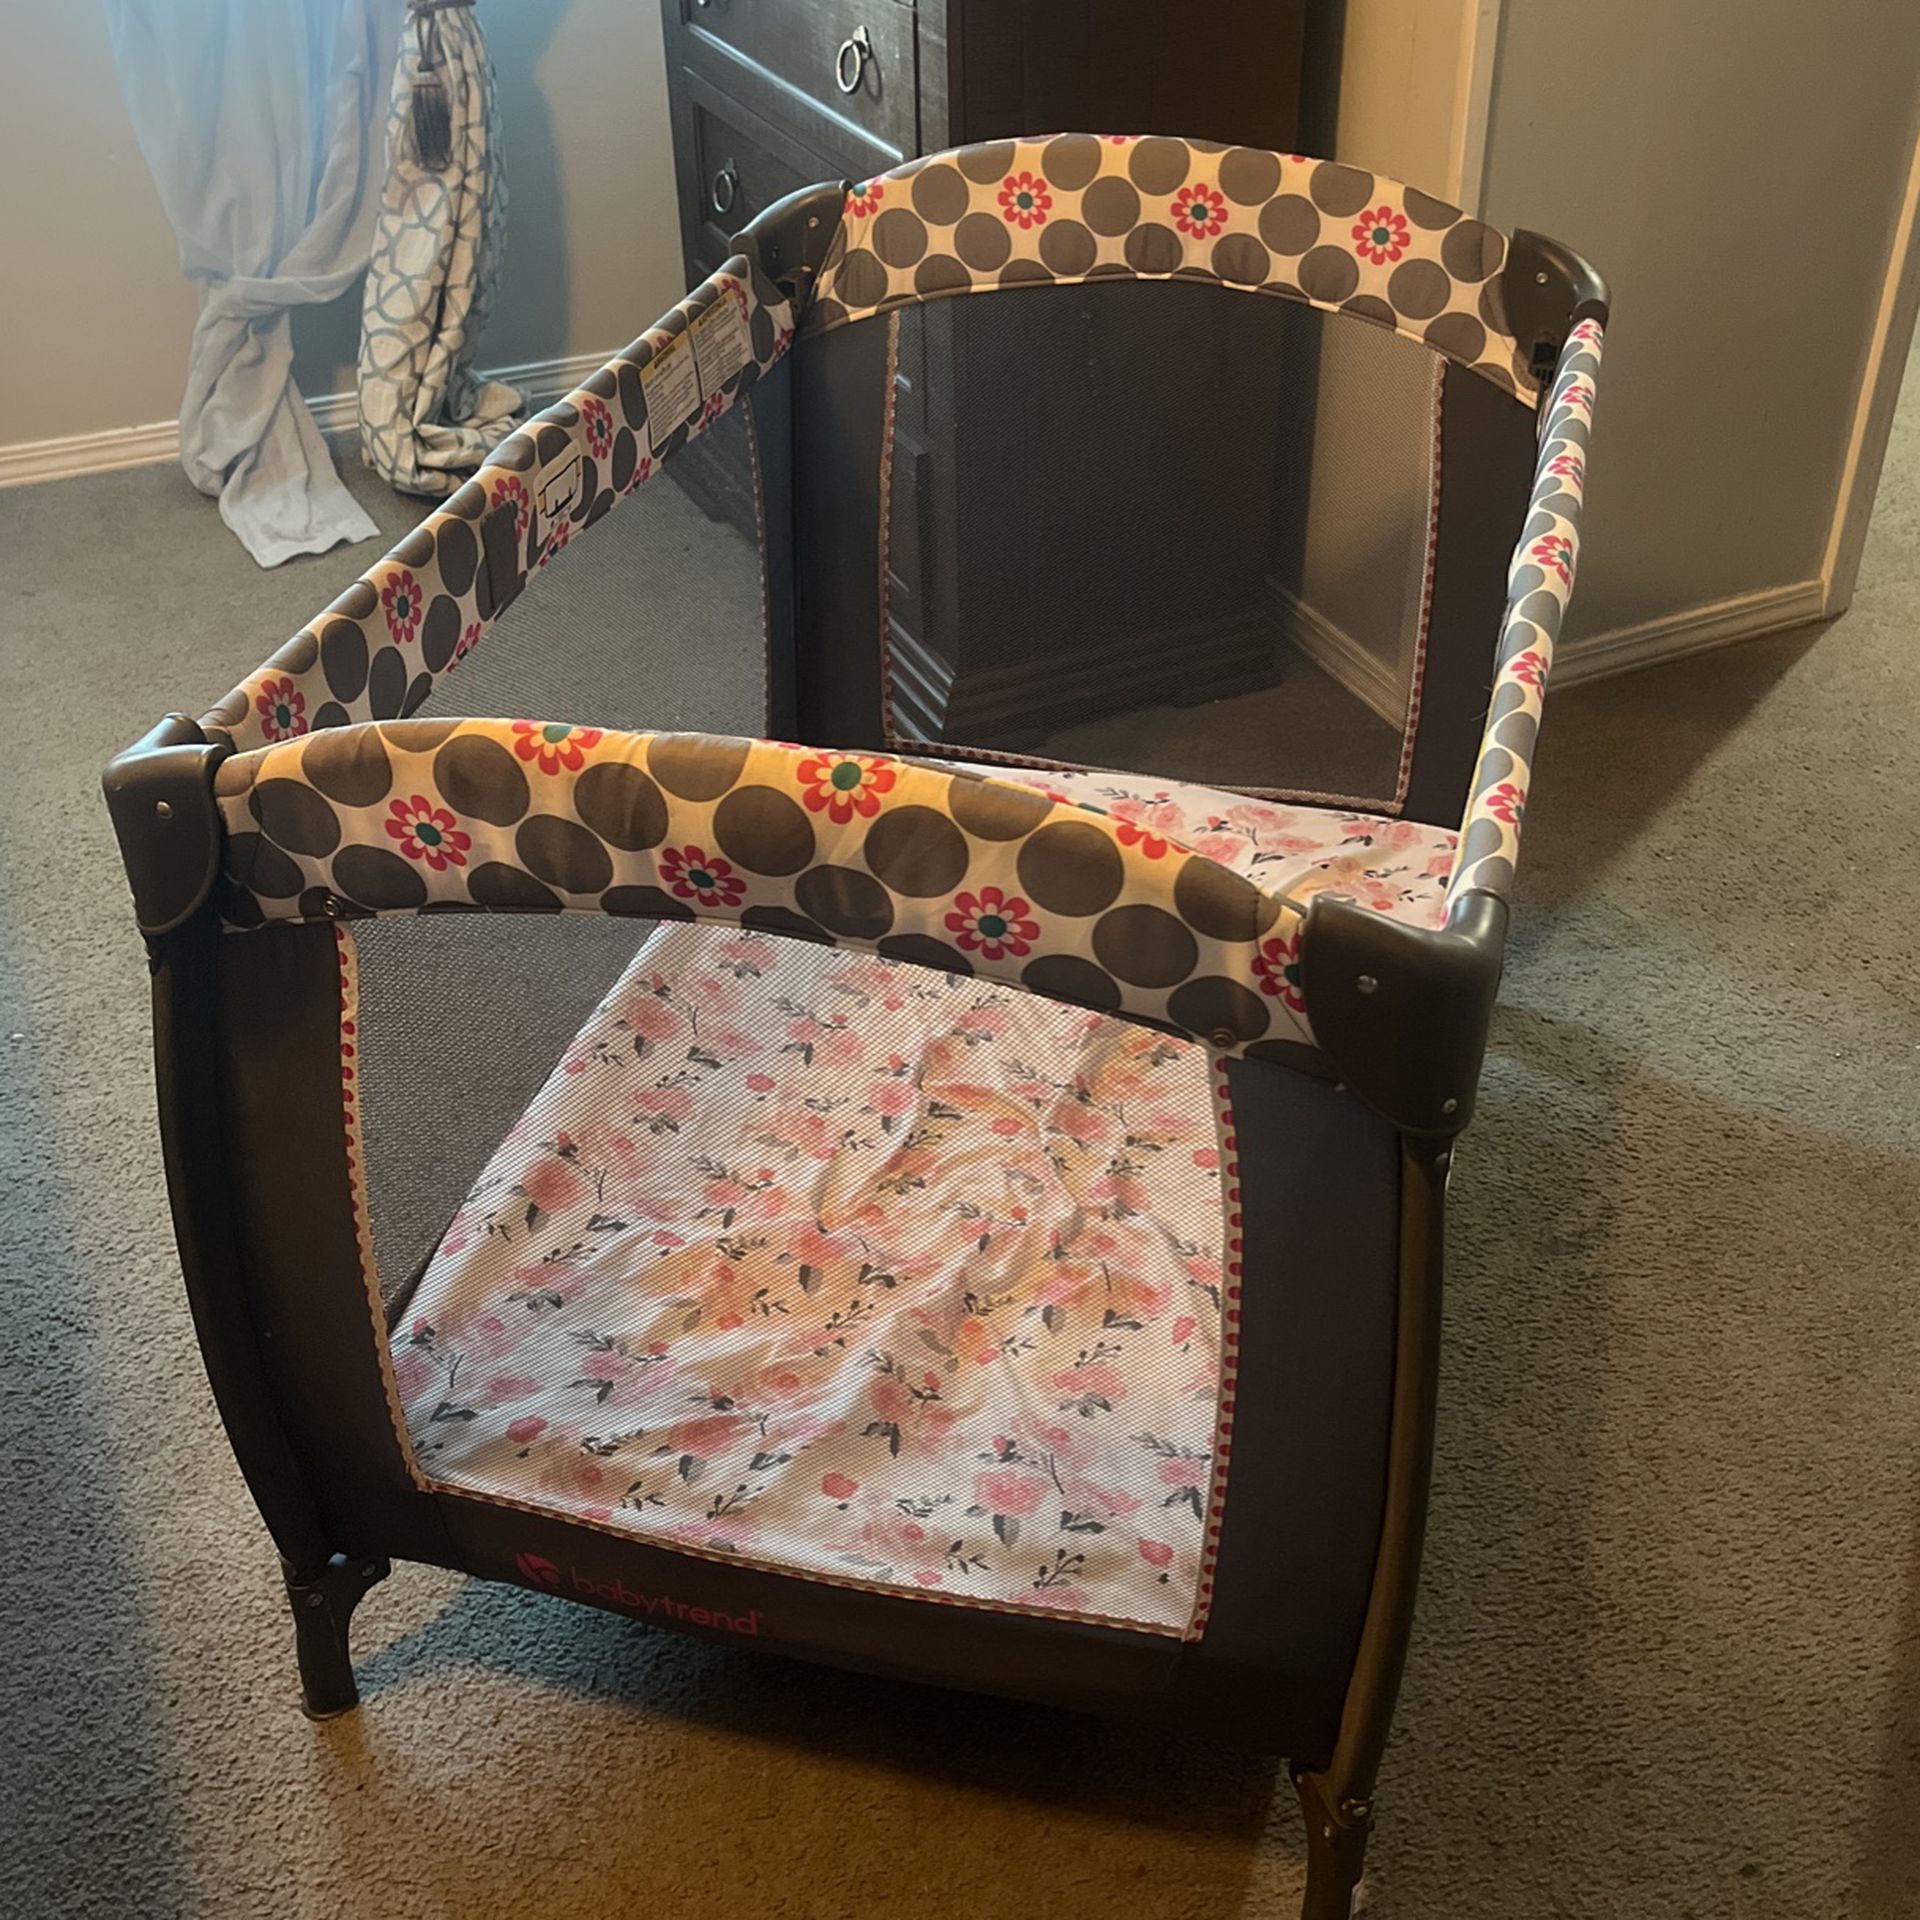 Portable Baby Crib Park With Mattress Included (0 - 2years Old Babies)